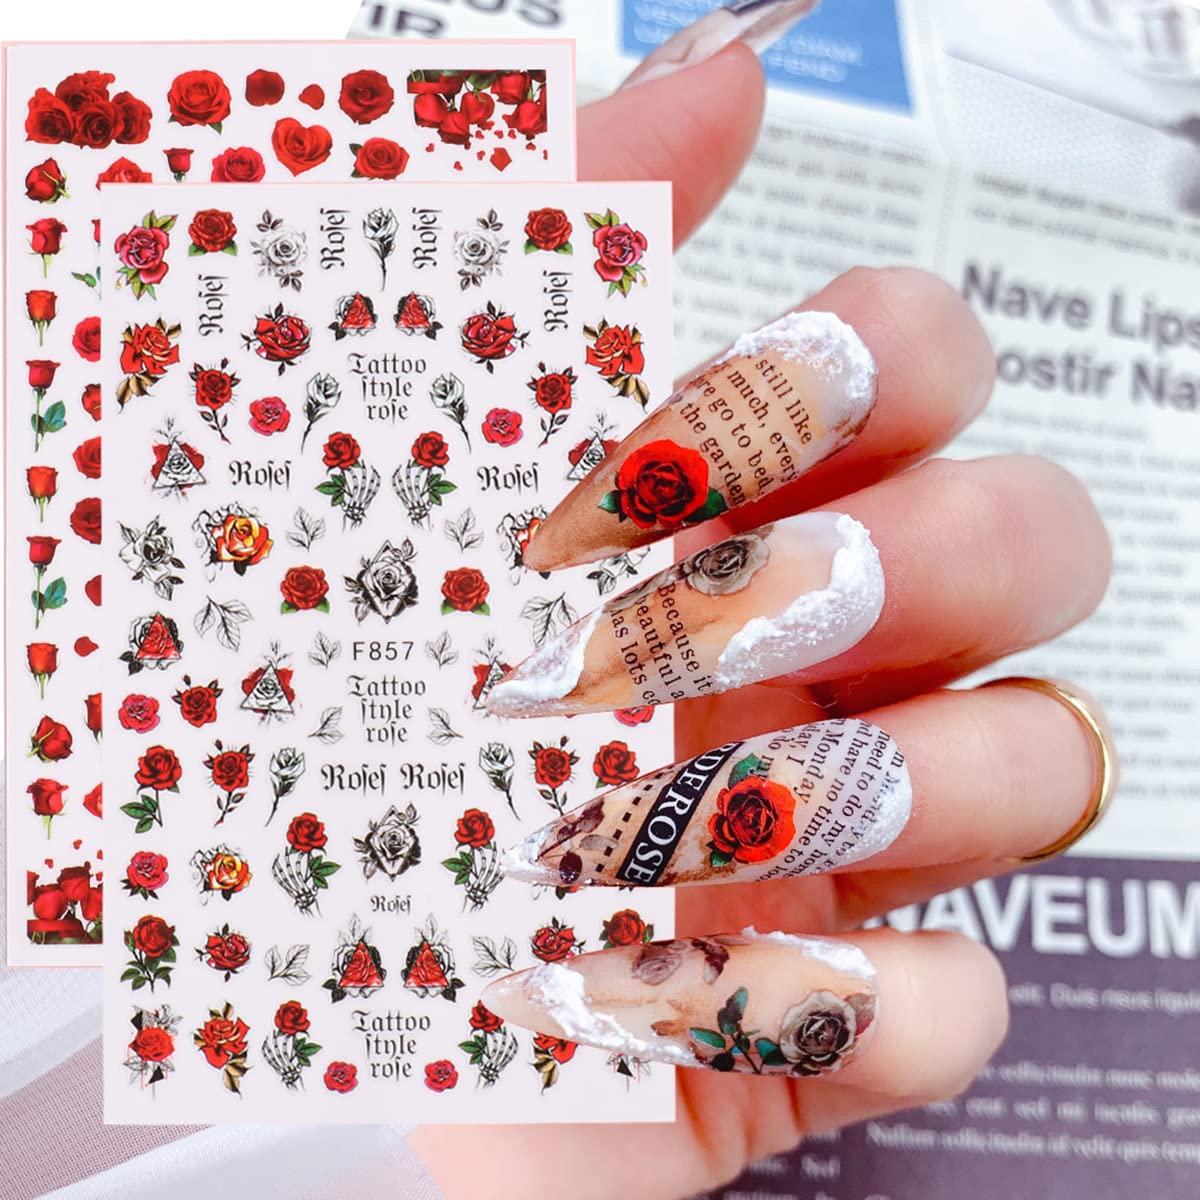 Fashion Colorful Decals Manicure 3D Art Stickers Decal Manicure Self  Adhensive Nail DIY Design Nail Art Stickers for Nail Tools Decorations